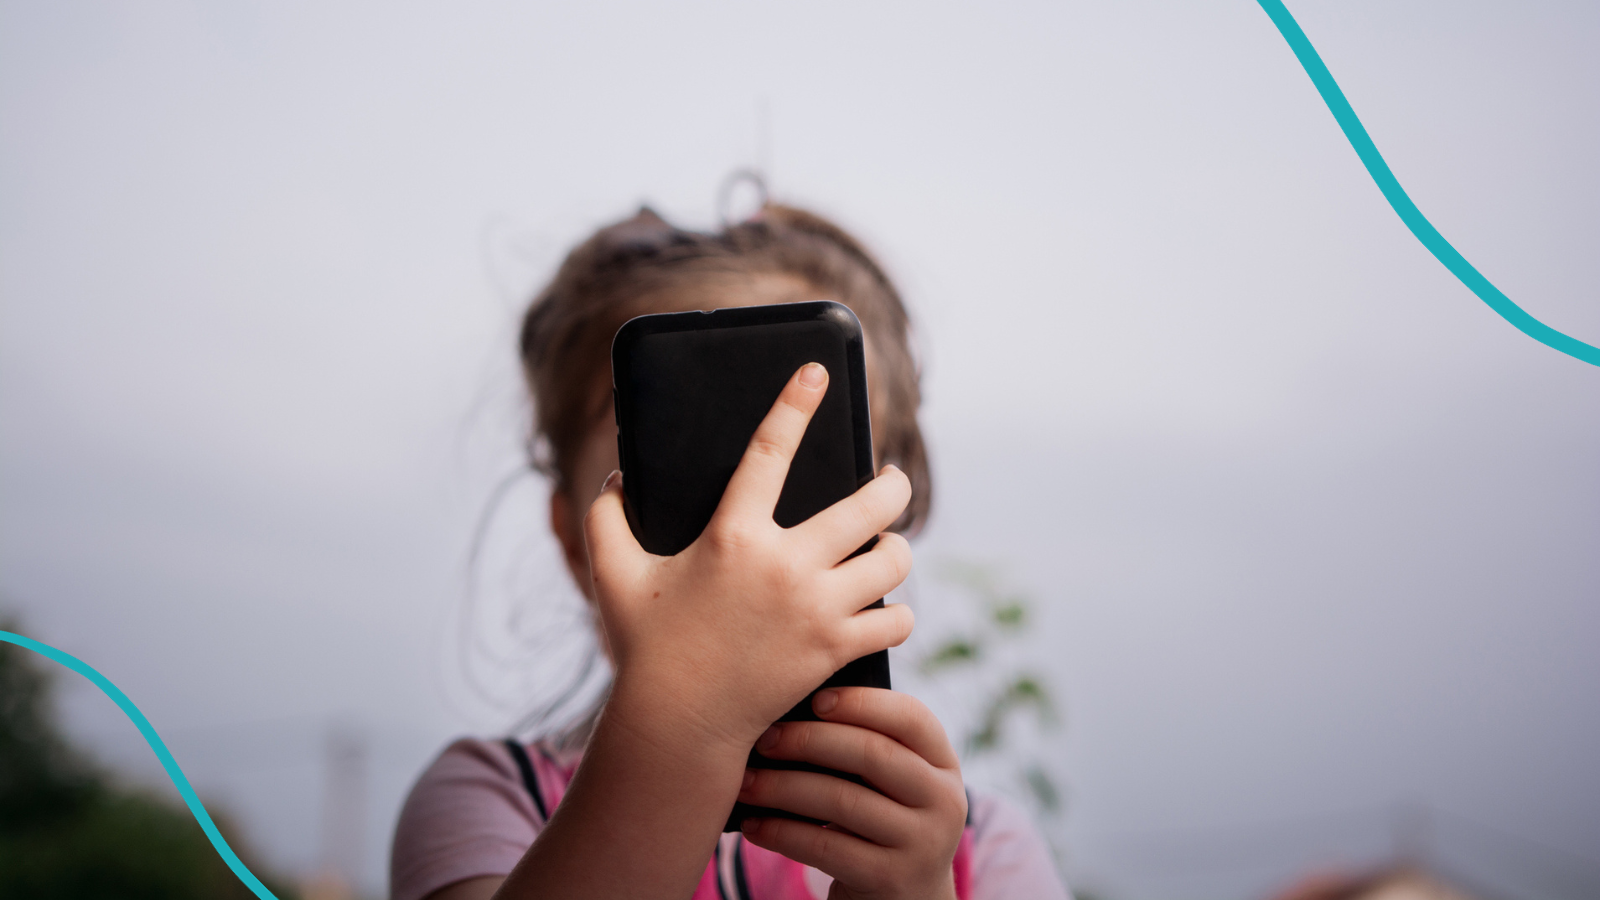 Picture of little girl to show smartphones threat